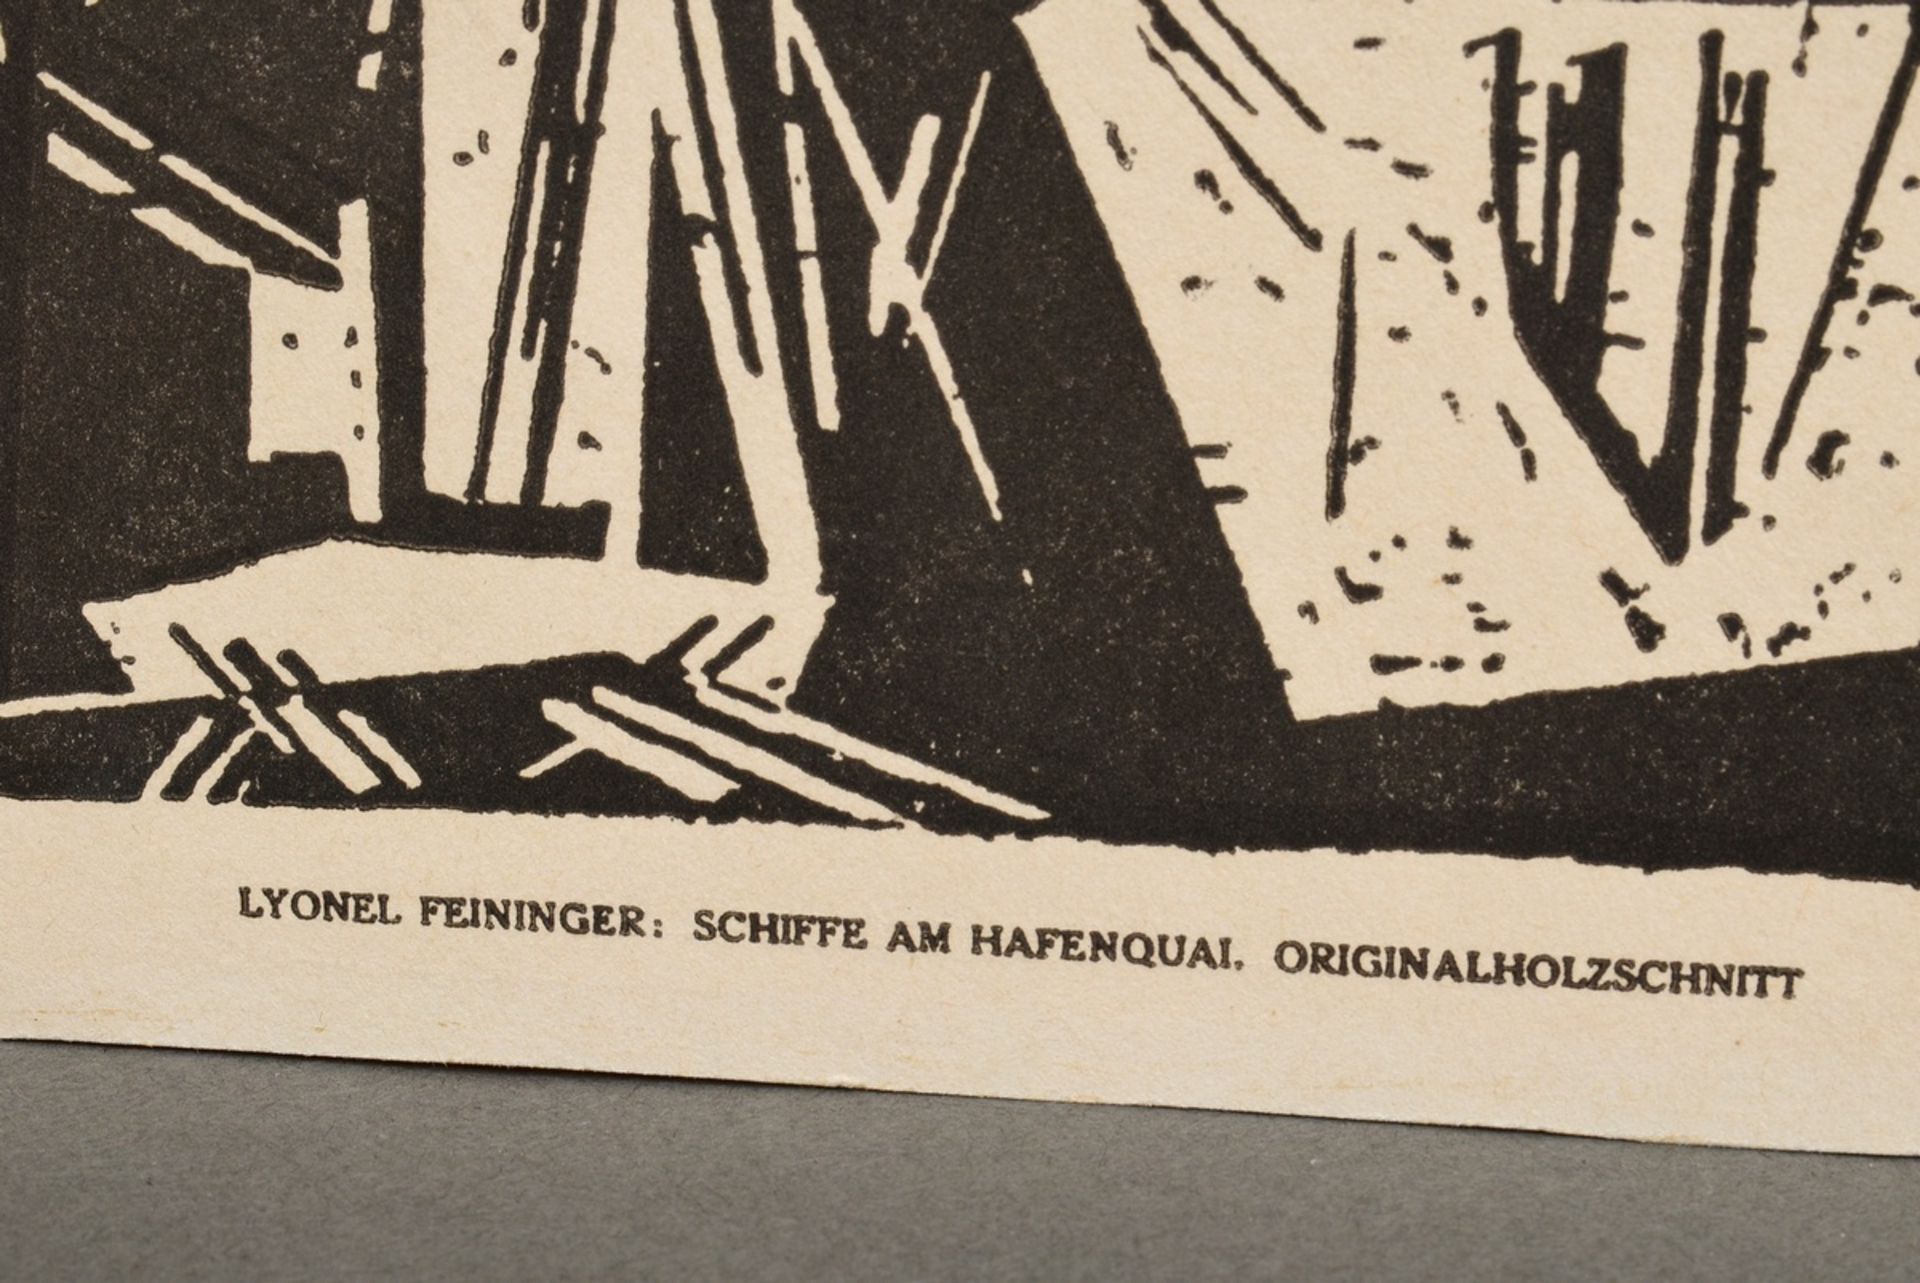 Feininger, Lyonel (1871-1956) "Ships at the harbour quay" 1918, woodcut, b. titl./inscr., SM 20x27, - Image 2 of 2